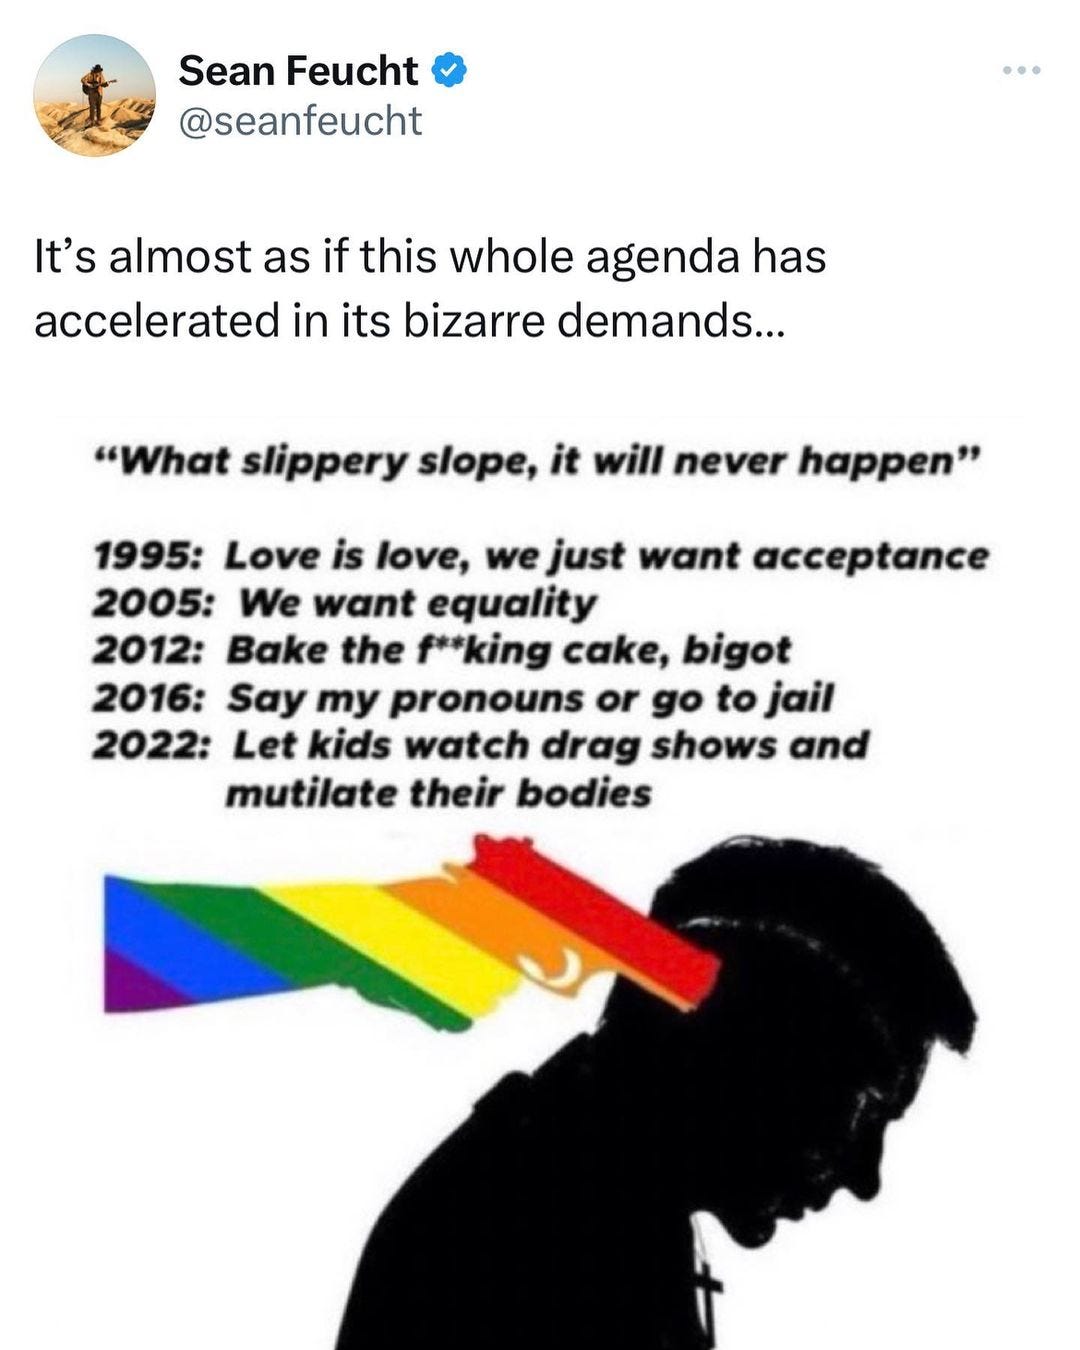 May be an image of text that says 'Sean Feucht @seanfeucht It's almost as if this whole agenda has accelerated in its bizarre demands... "What slippery slope, it will never happen' 1995: Love is love, we just want acceptance 2005: We want equality 2012: Bake the f**king cake, bigot 2016: Say my pronouns or go to jail 2022: Let kids watch drag shows and mutilate their bodies'